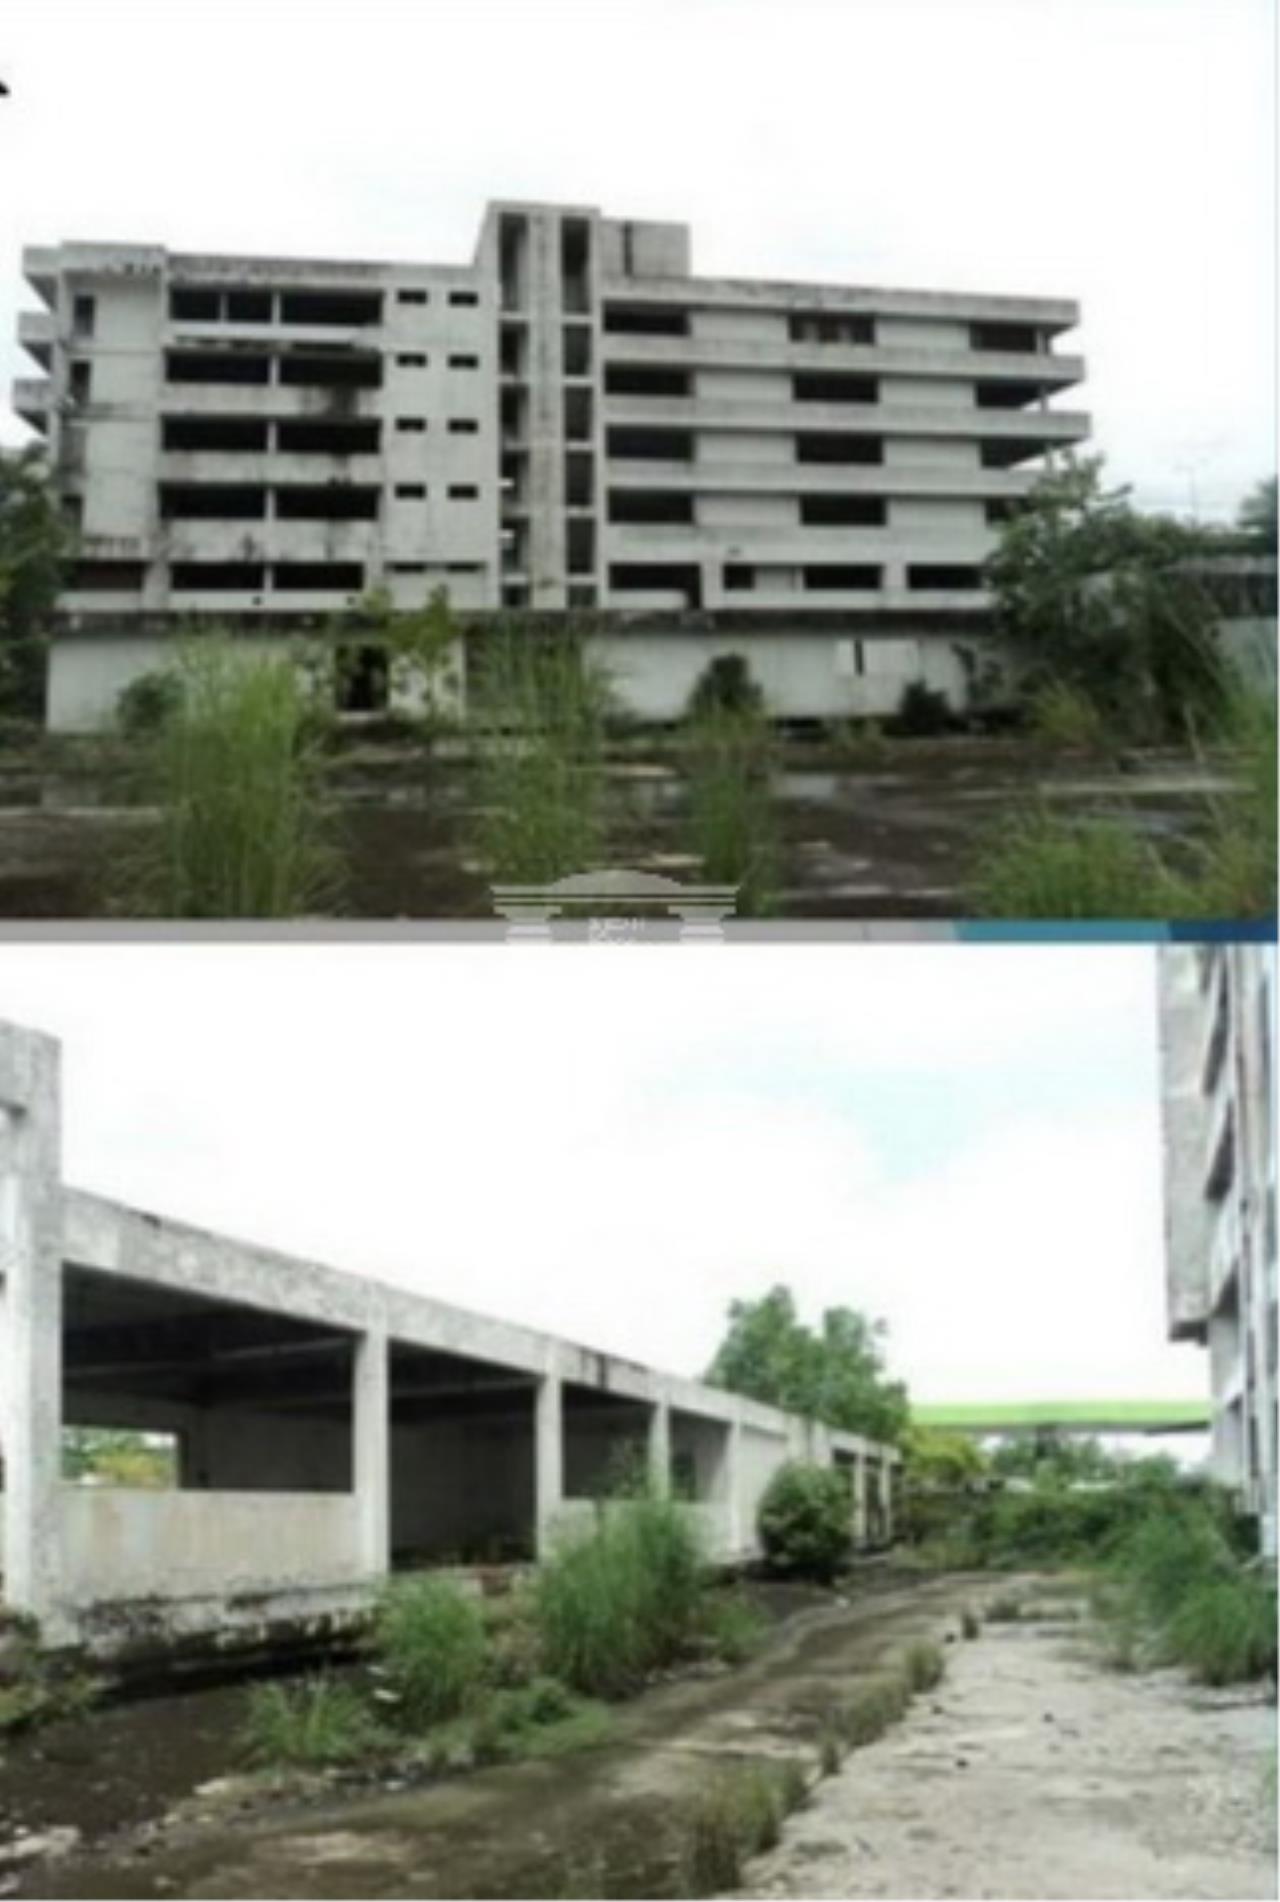 40052 - Bangna-Trad Road km28 Land with 6 floors 1 house area 264 acres, ภาพที่ 4